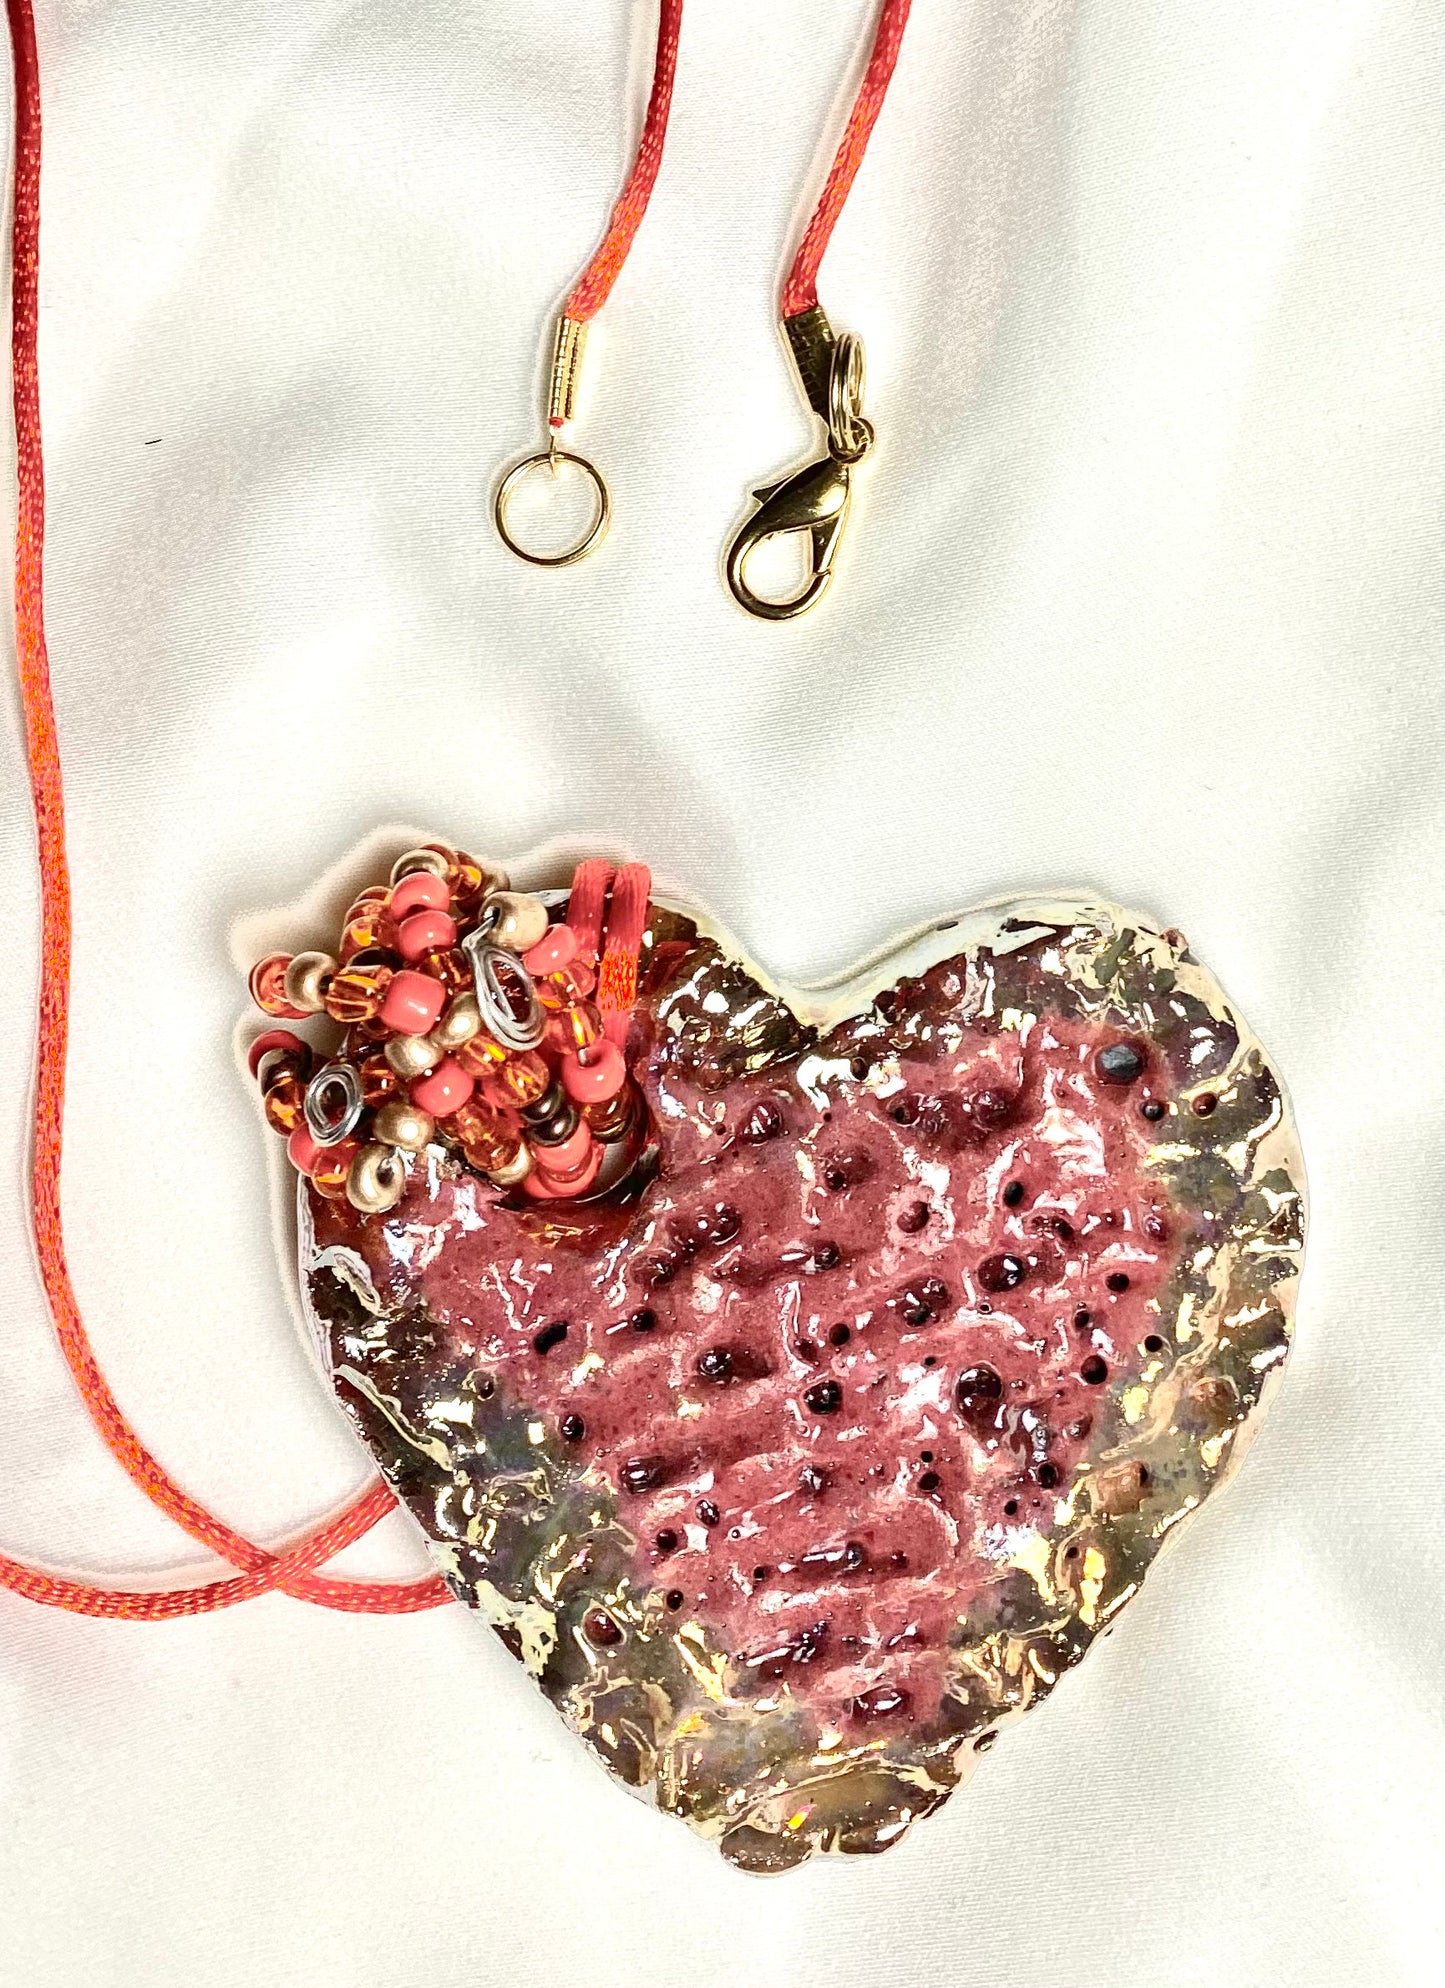  Have A Heart ! Each heart pendant is handmade with love! It is 3"x 3" and weighs approx. 3ozs. This pendant has a red violet and gold metallic raku glazes that renders a unique translucent  patina. The heart has a textured pattern . Both sides are  are different and equally beautiful! It holds a spiral of red and gold mini beads on a spiral copper wire. This pendant has a nice 12" red rattail cord!